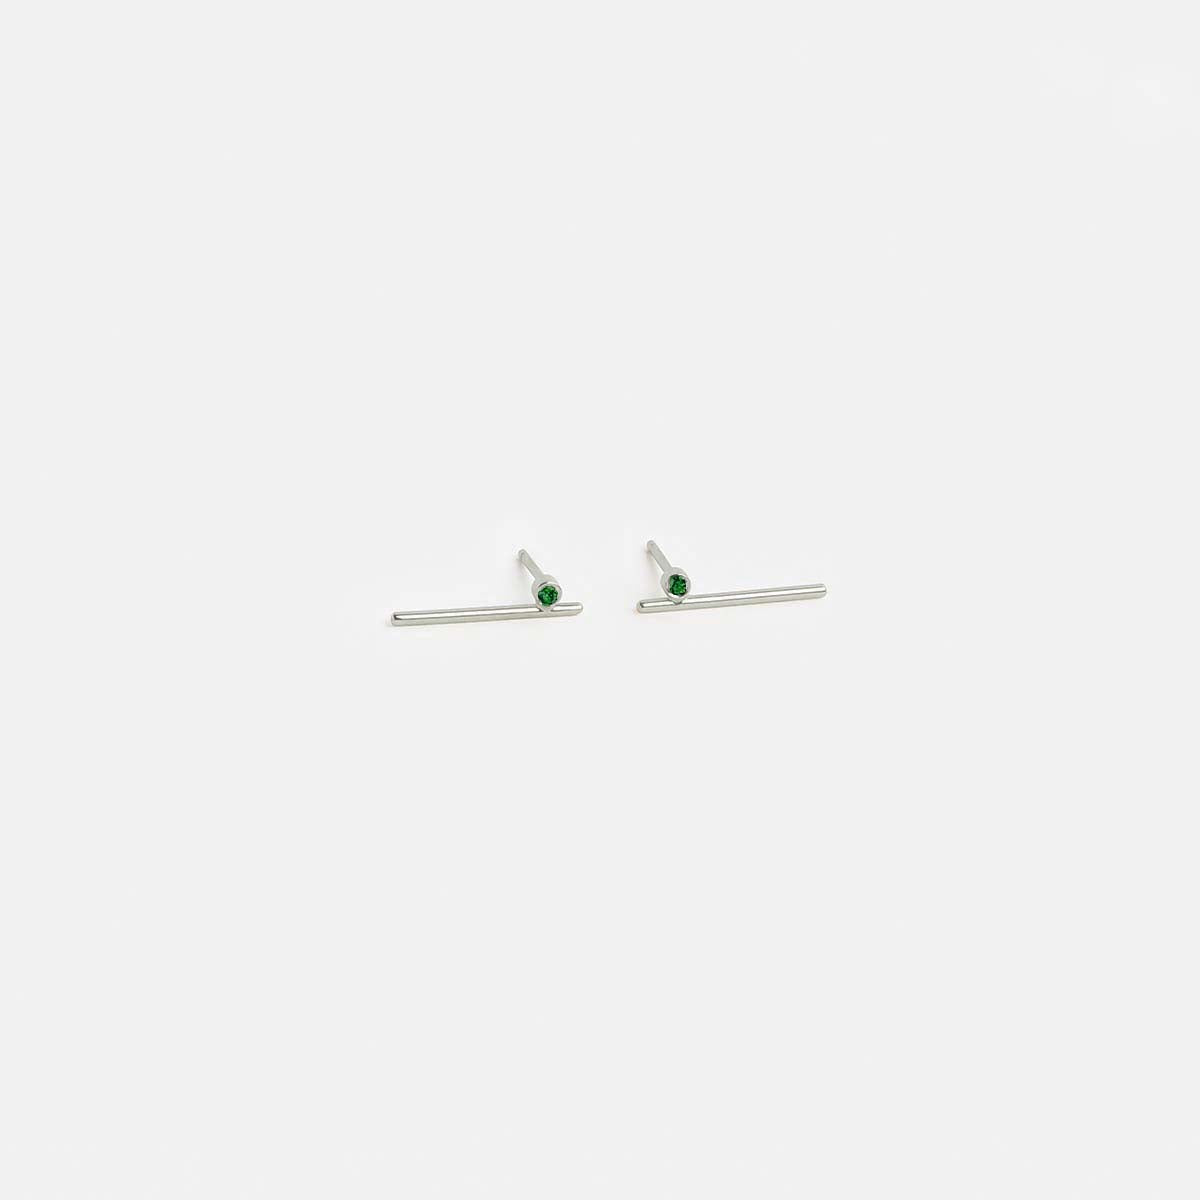 Livi Medium Delicate Studs in 14k White Gold set with Emeralds By SHW Fine Jewelry NYC